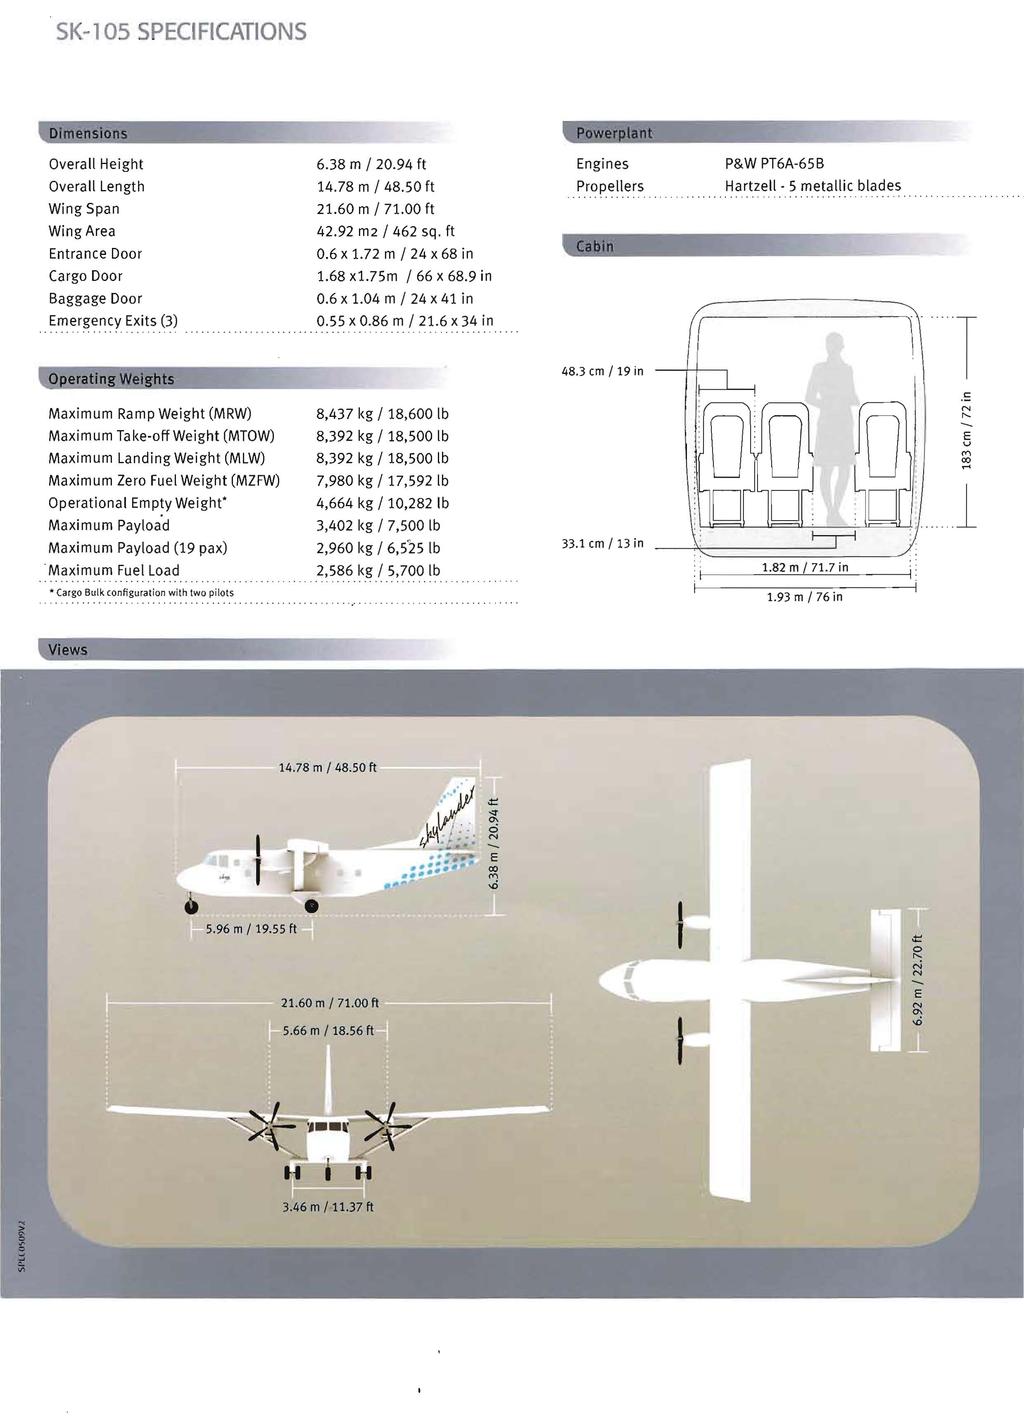 SK-10S SPECIFICATIONS Dimensions Overall Height 6.38 m / 20.94 ft Engines P&W PT6A-65B Overall Length 14.78 m / 48.50 ft Propellers Hartzell 5 metallic blades Wing Span 21.60 m / 71.